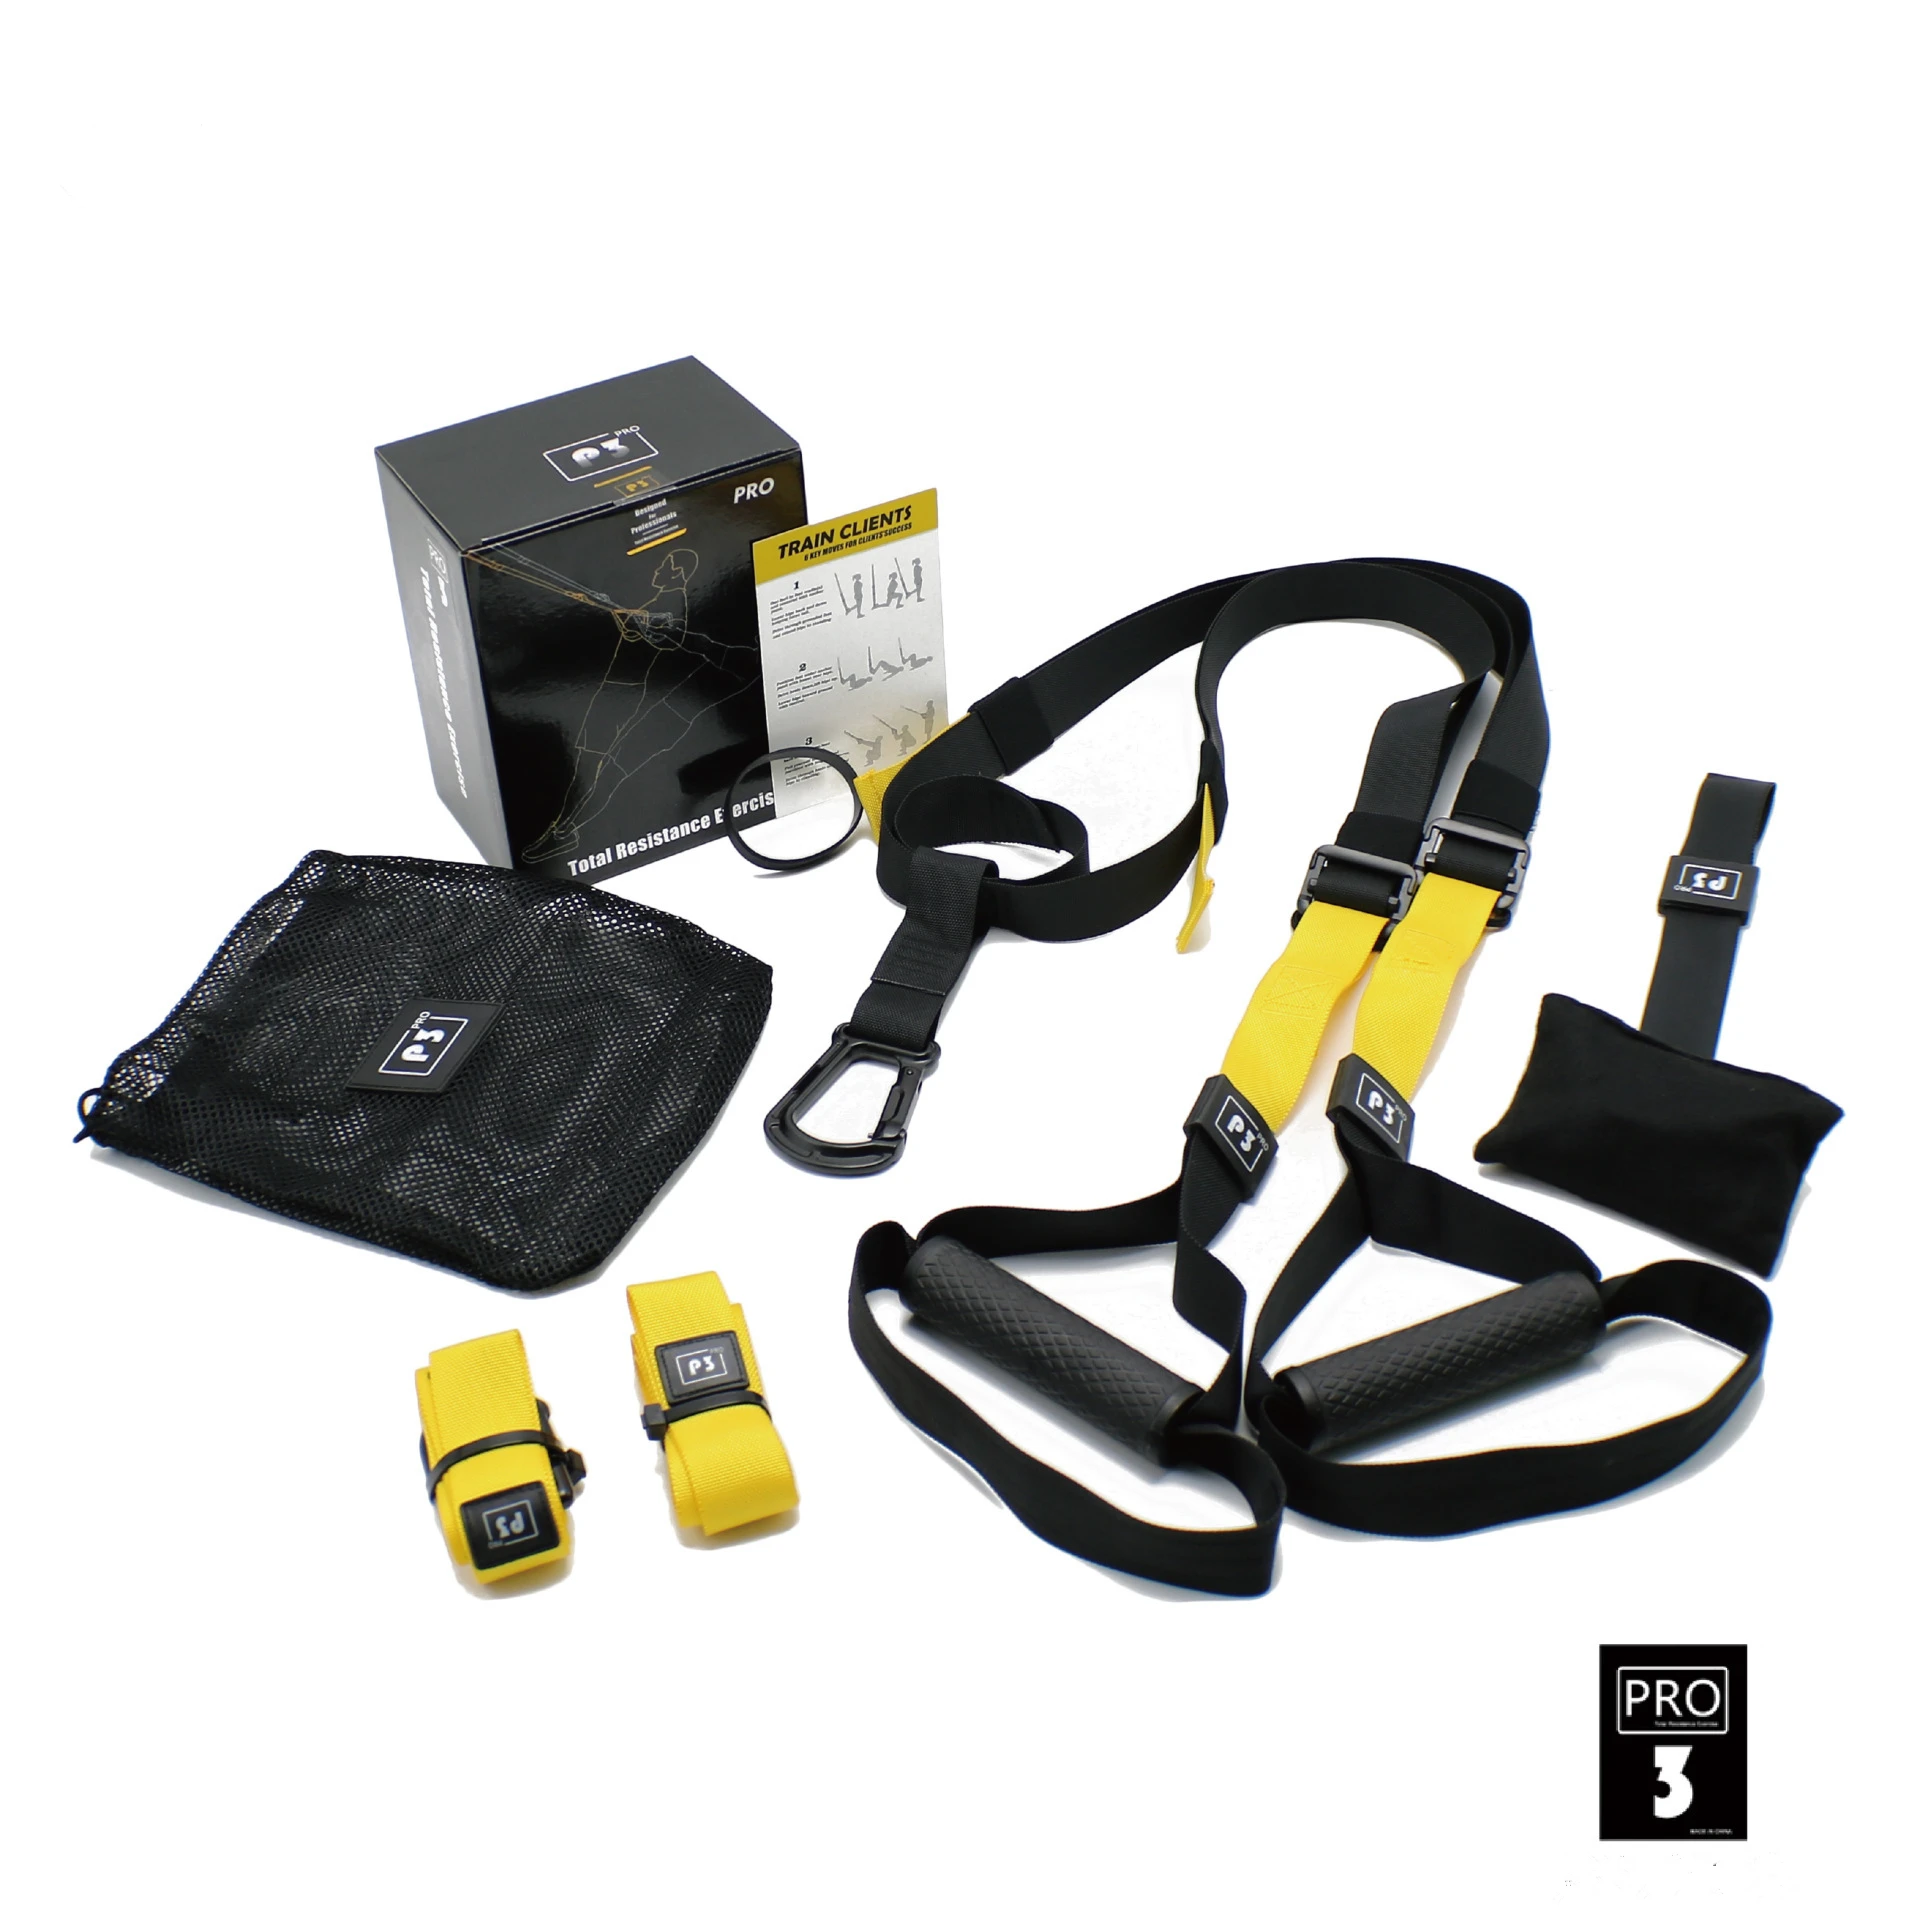 
Hot sale fitness suspension trainer system 